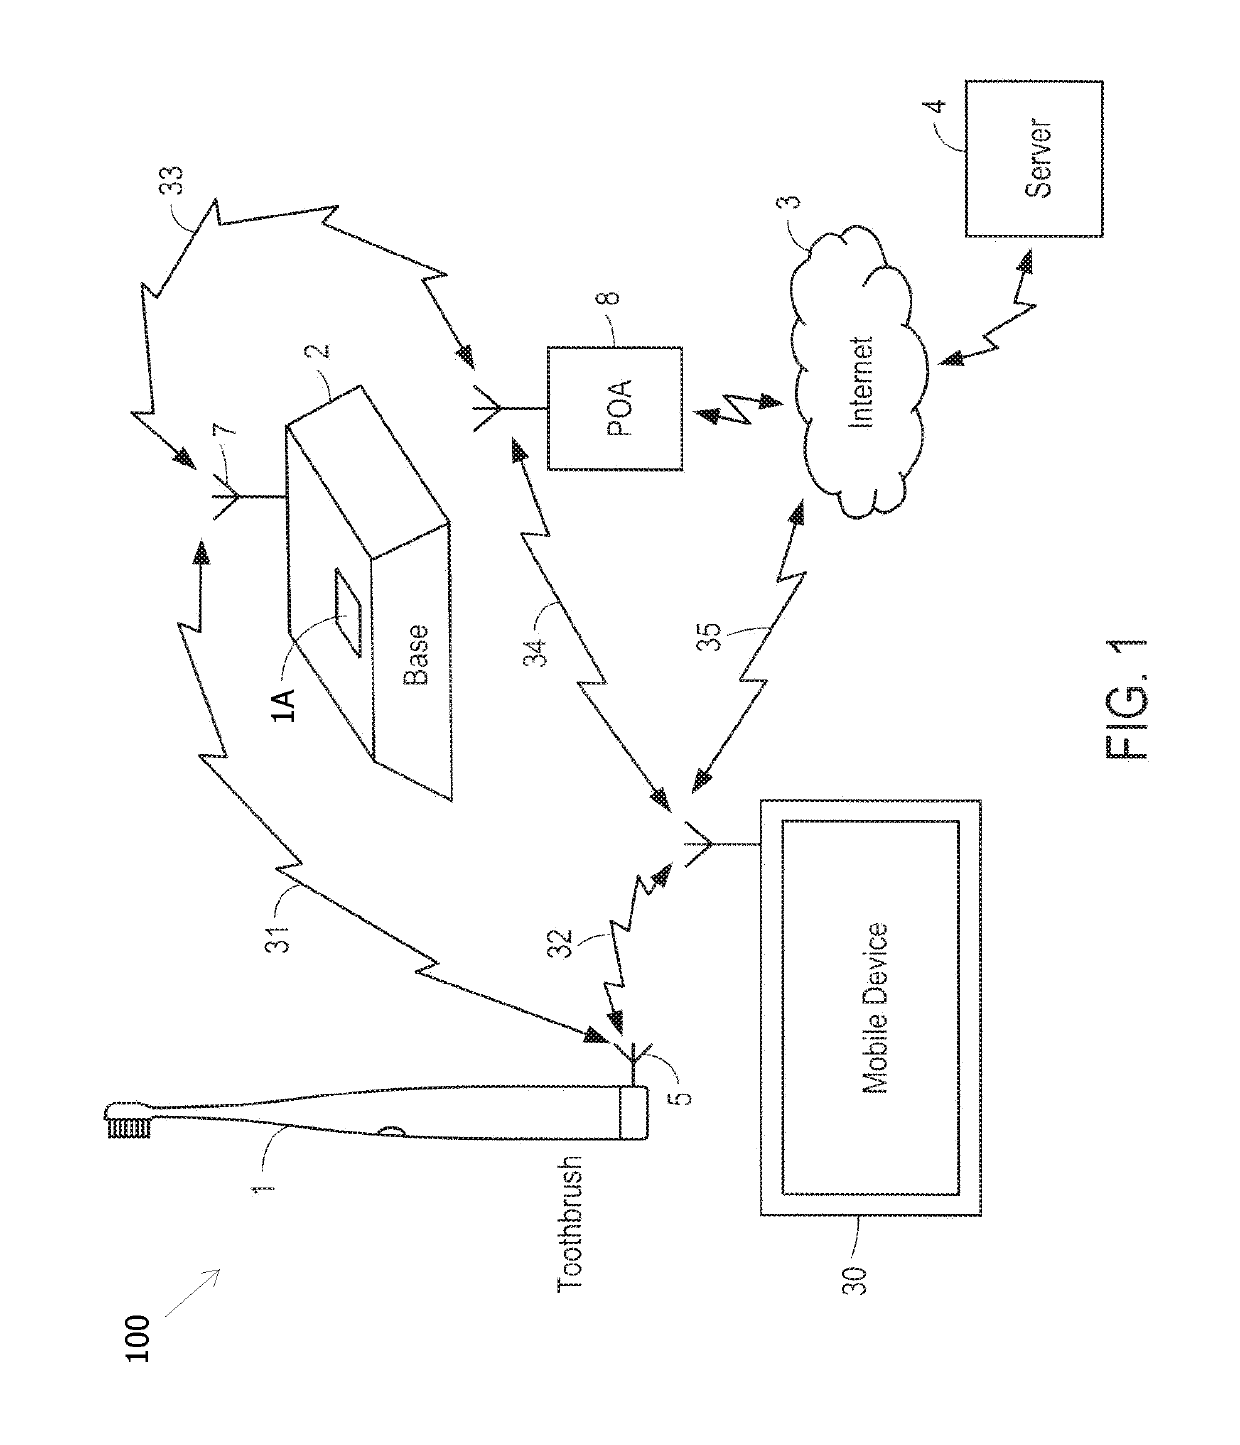 Toothbrush system with sensors for a dental hygiene monitoring system